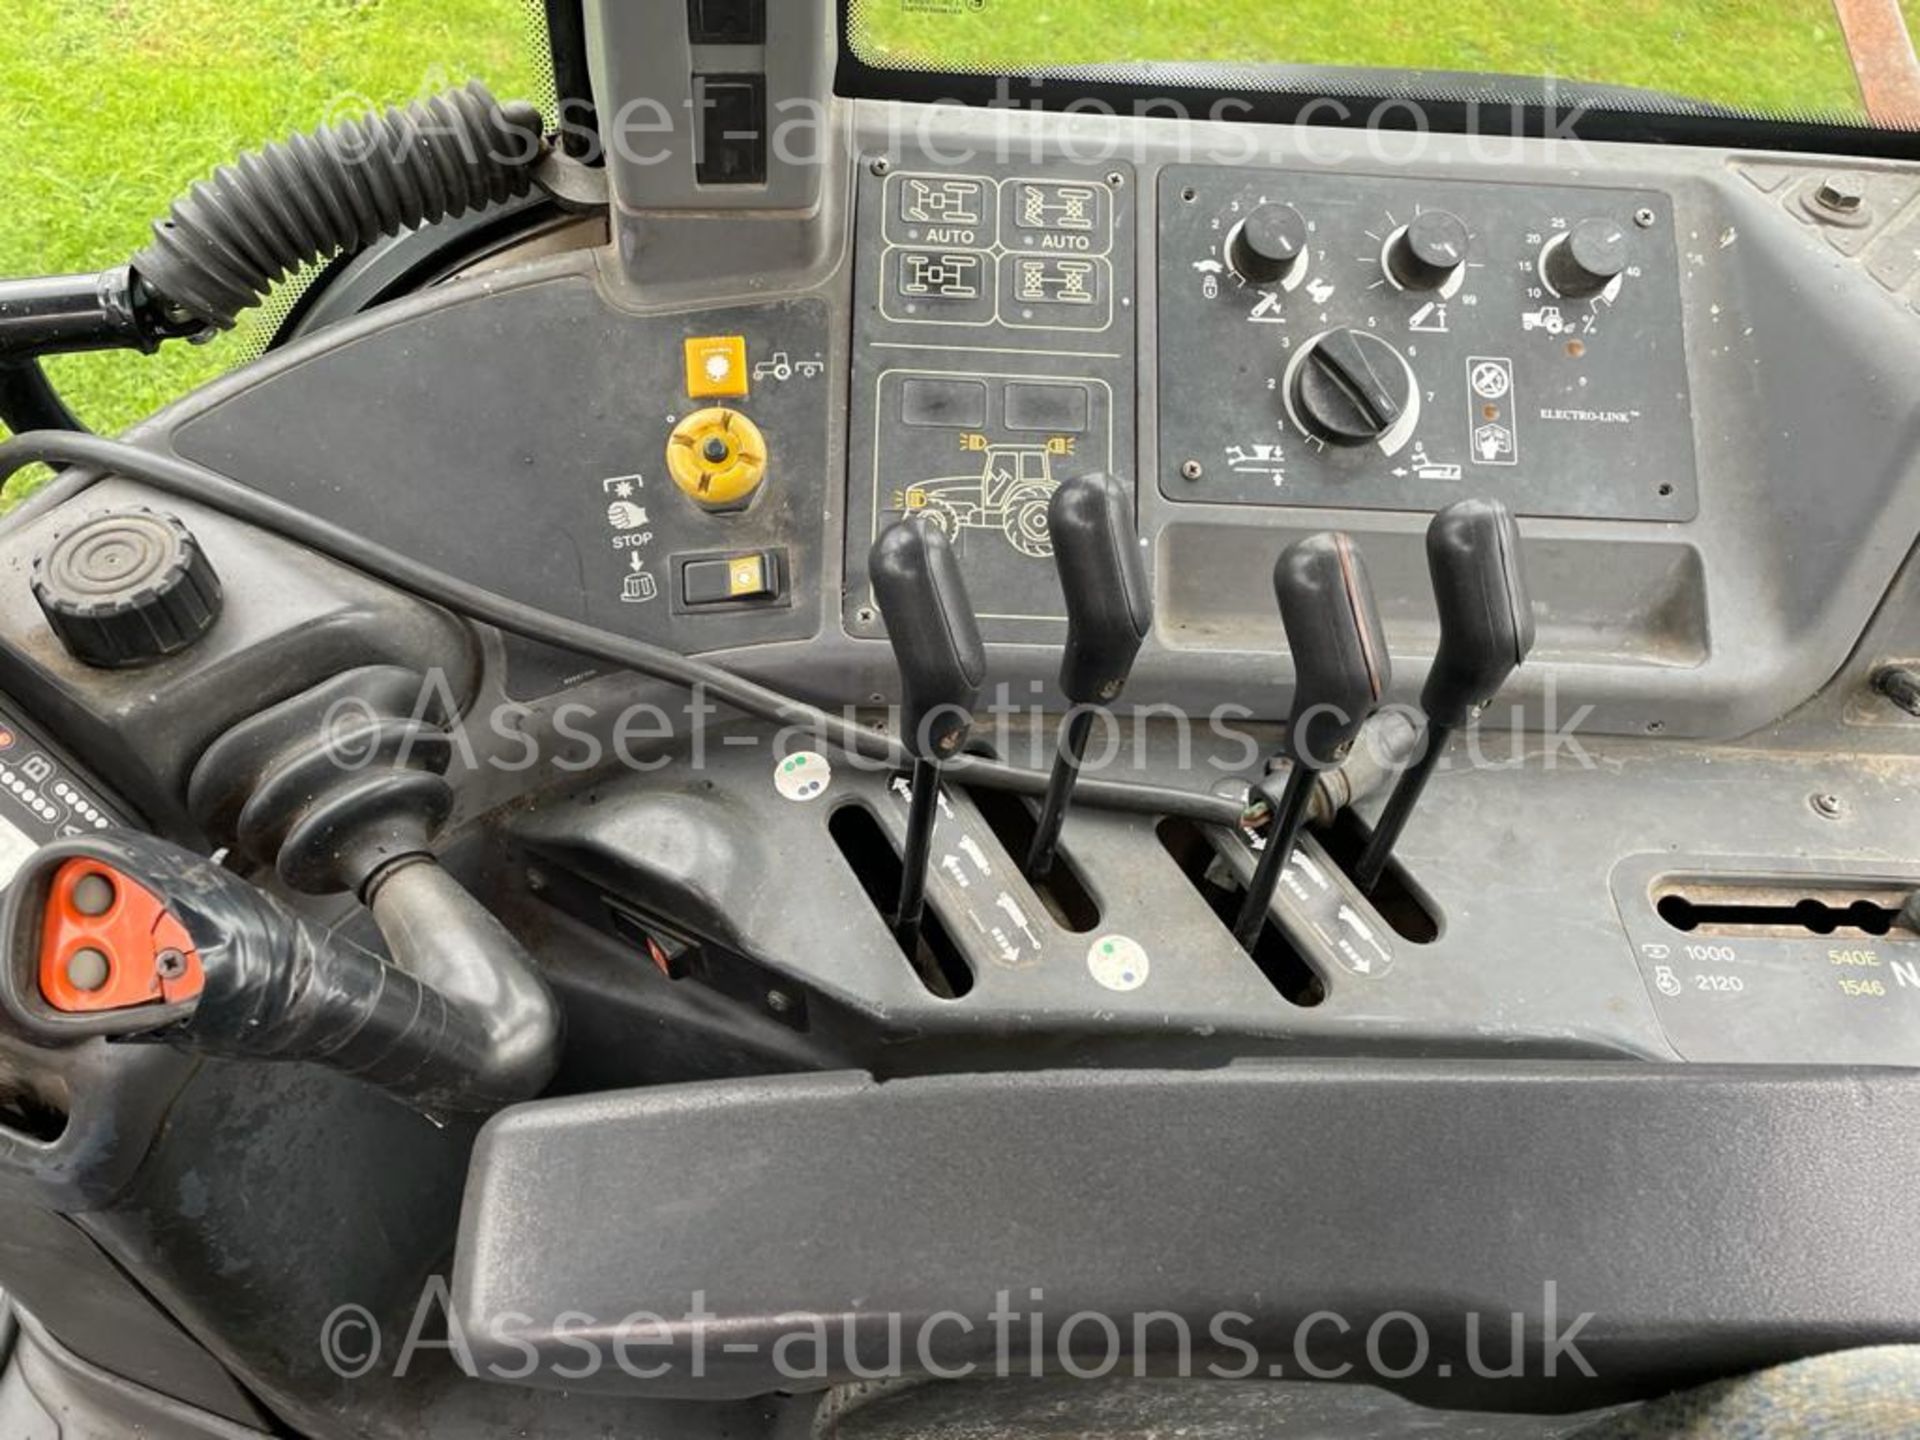 1997 NEW HOLLAND 8360 TRACTOR, APPROX 12000 HOURS, ENGINE GEARBOX AND HYDRAULICS WORKING PERFECTLY - Image 11 of 16